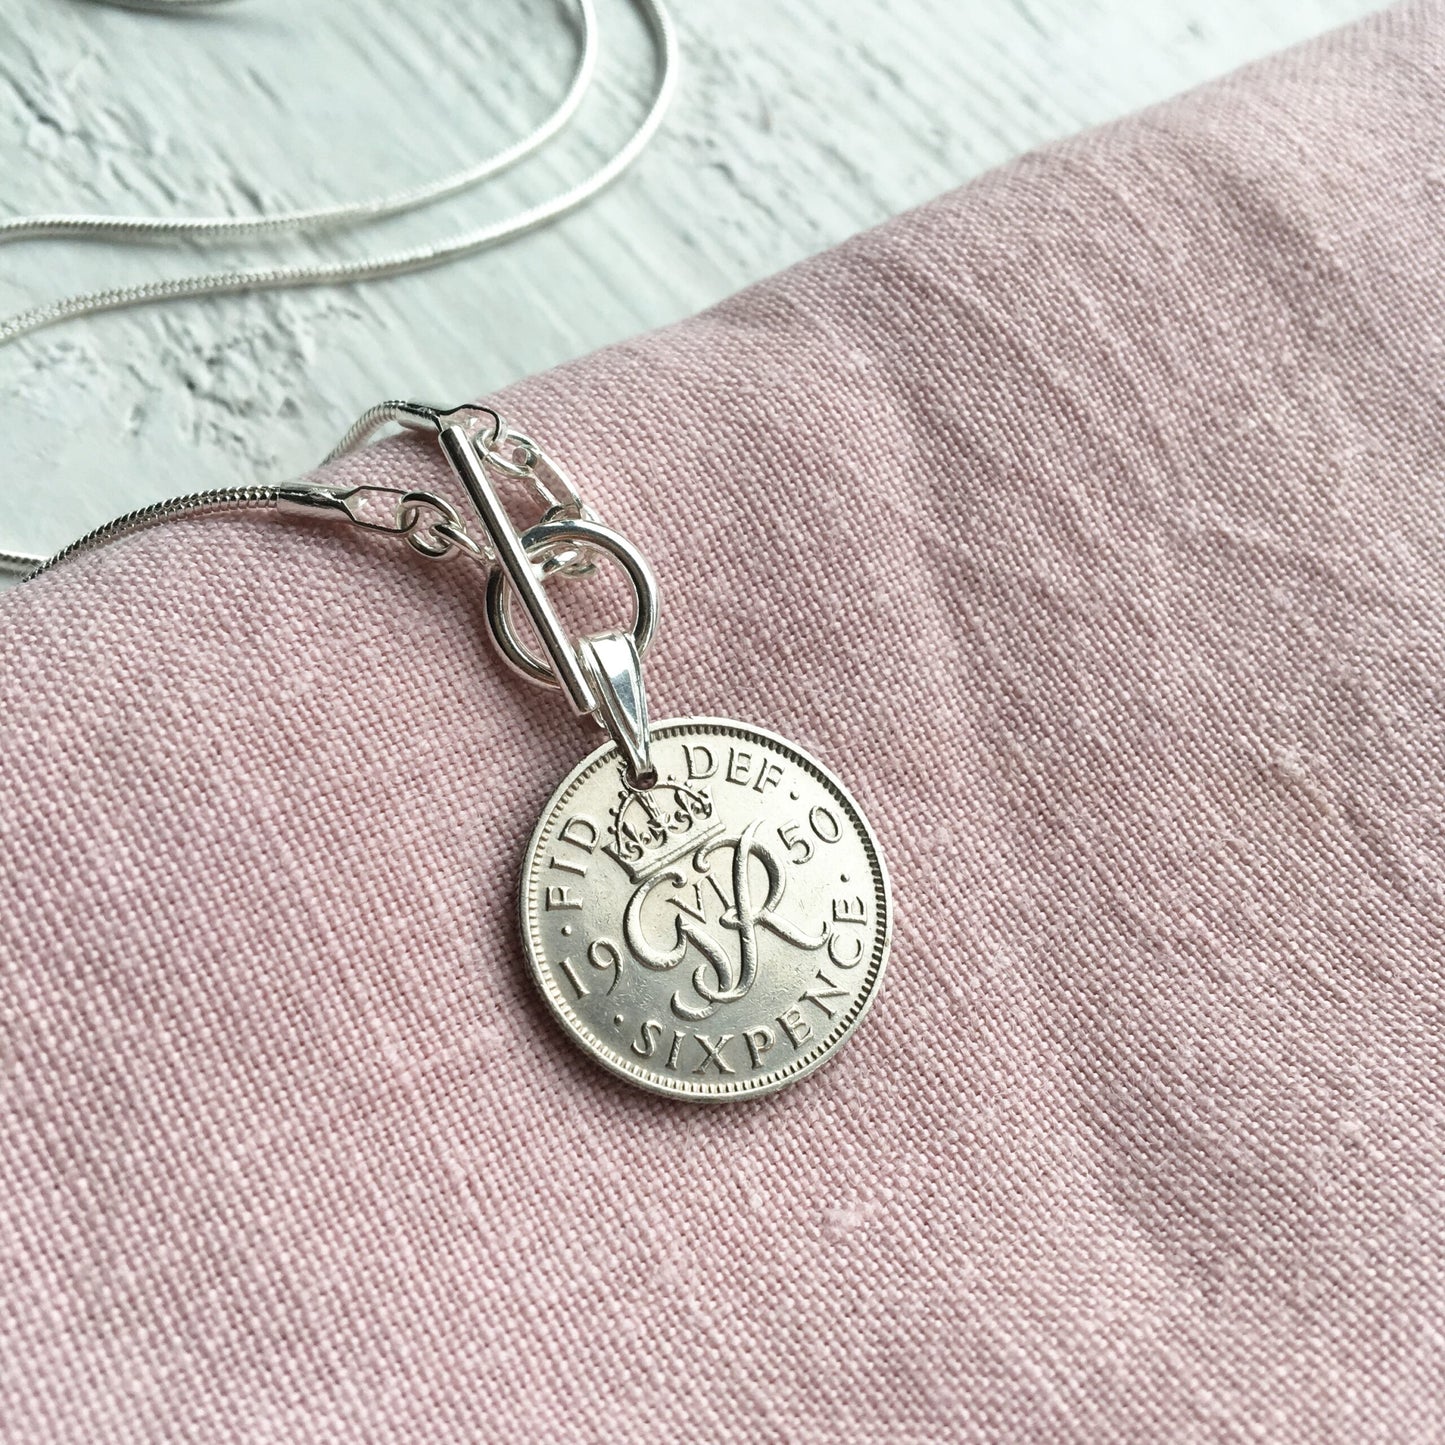 Christmas Day Sixpence Toggle Necklace